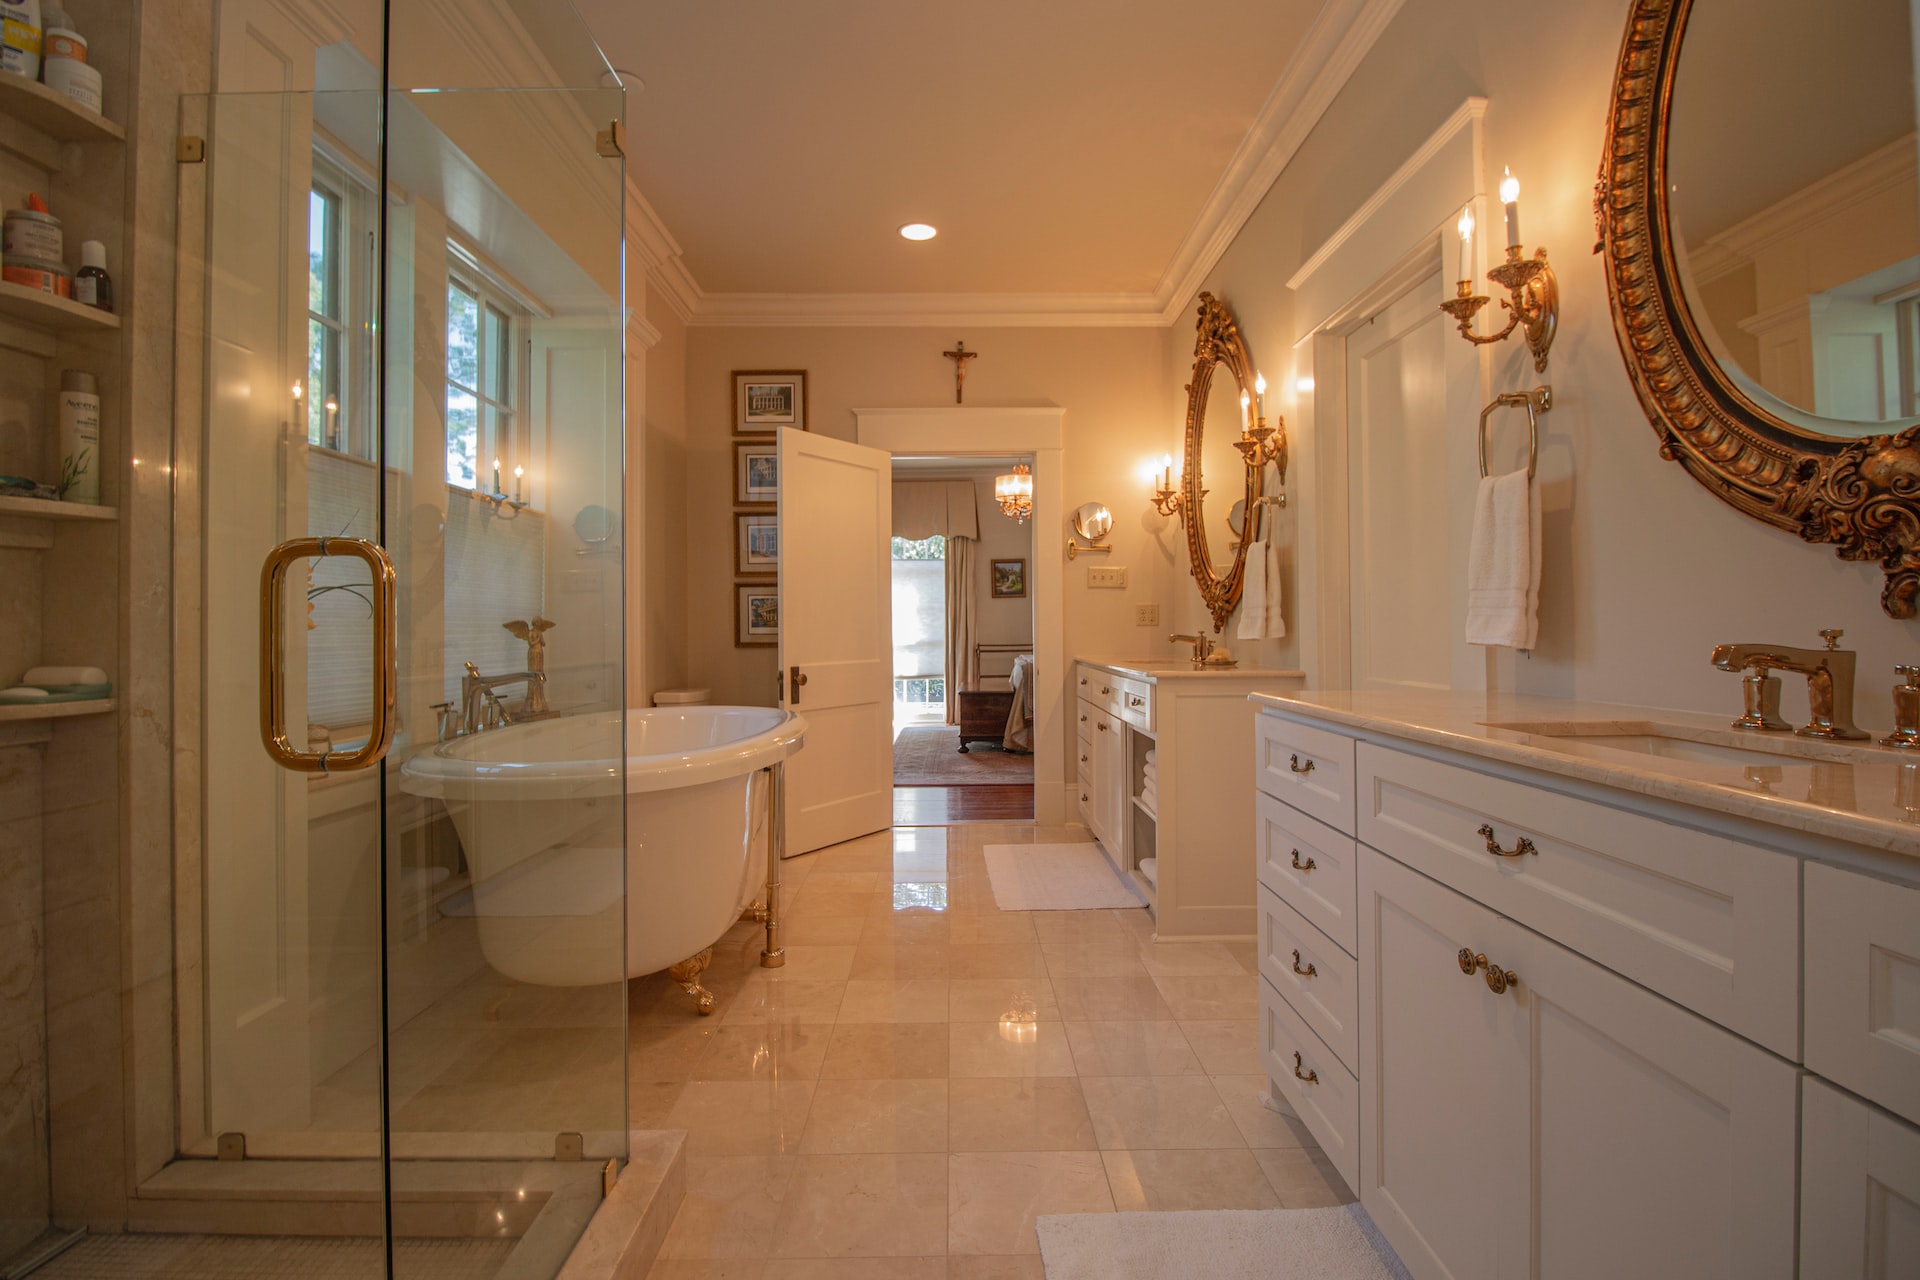 7 High-End Features You Can Add To Your Bathroom